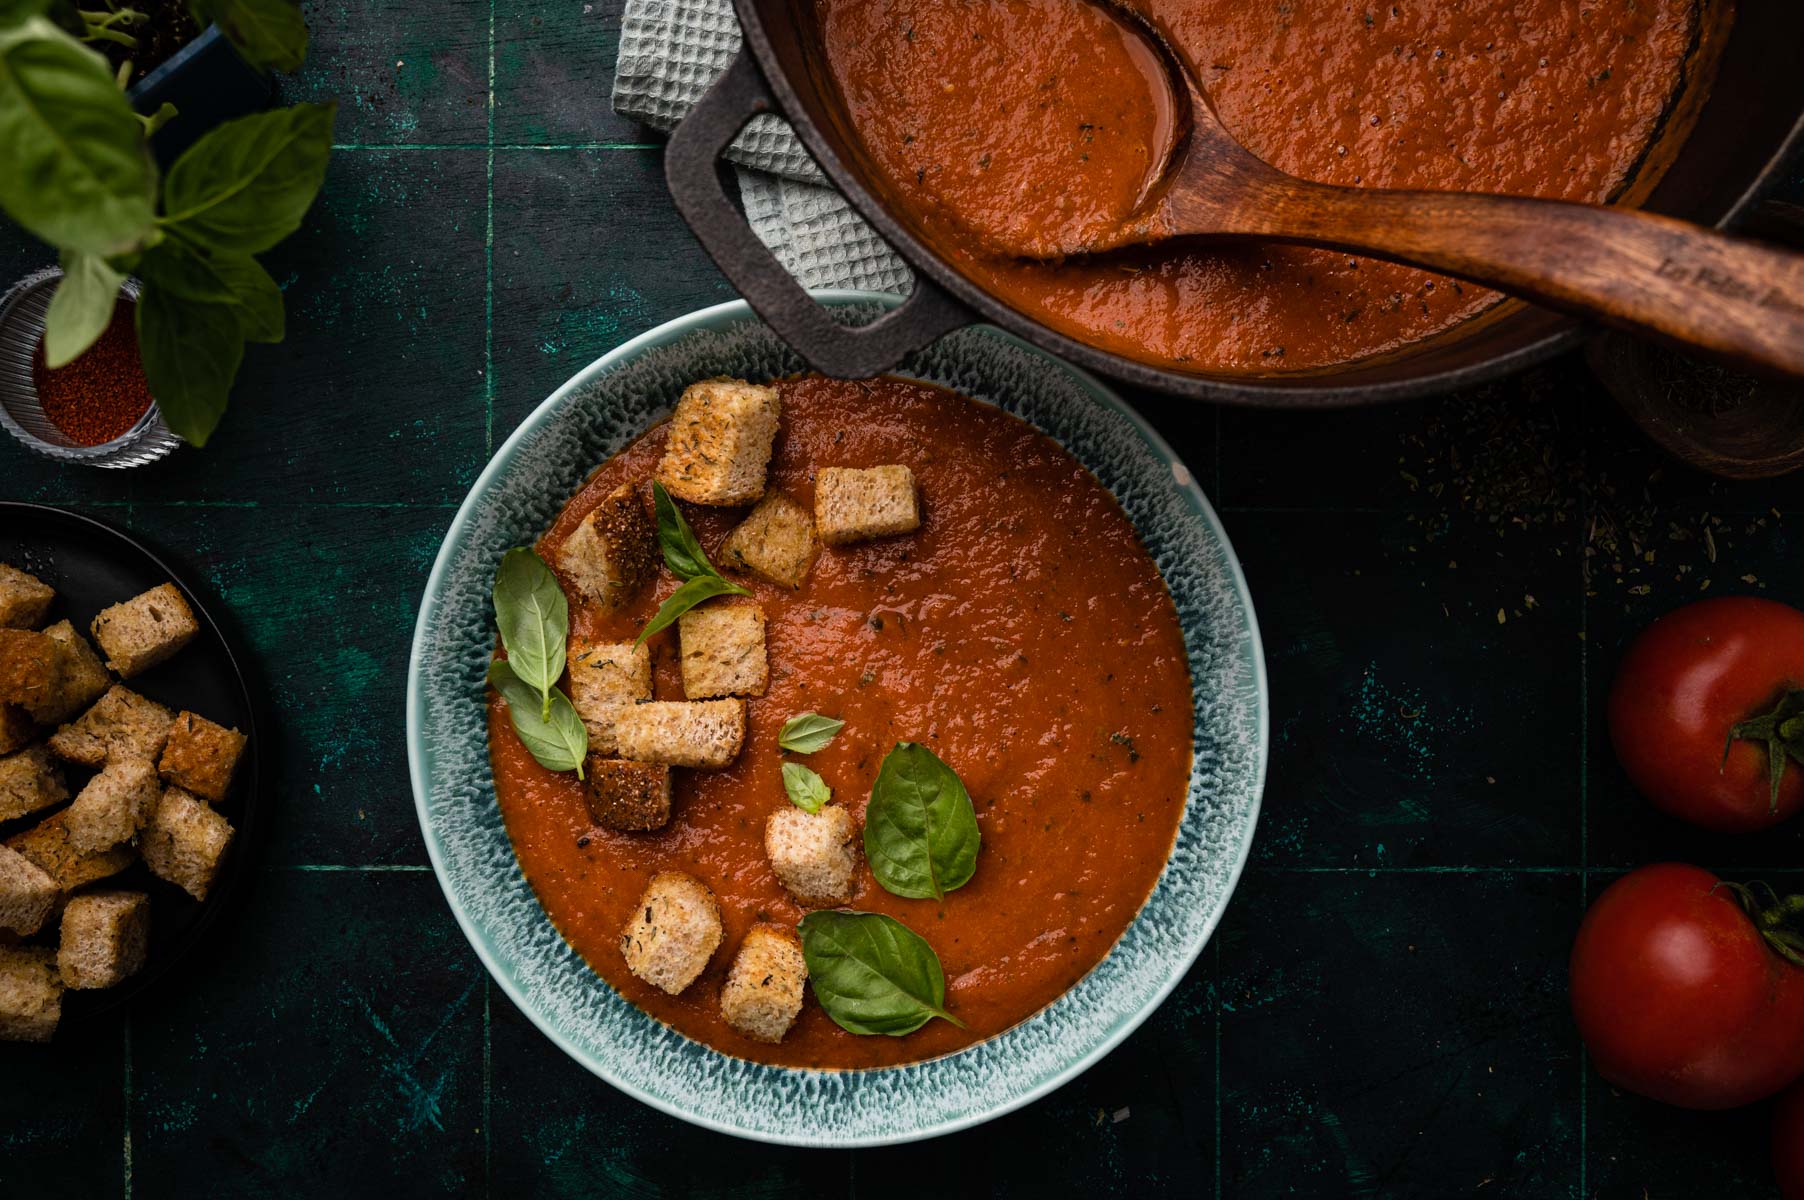 A bowl of tomato soup with croutons and basil leaves, accompanied by a wooden spoon and fresh tomatoes on a dark surface.